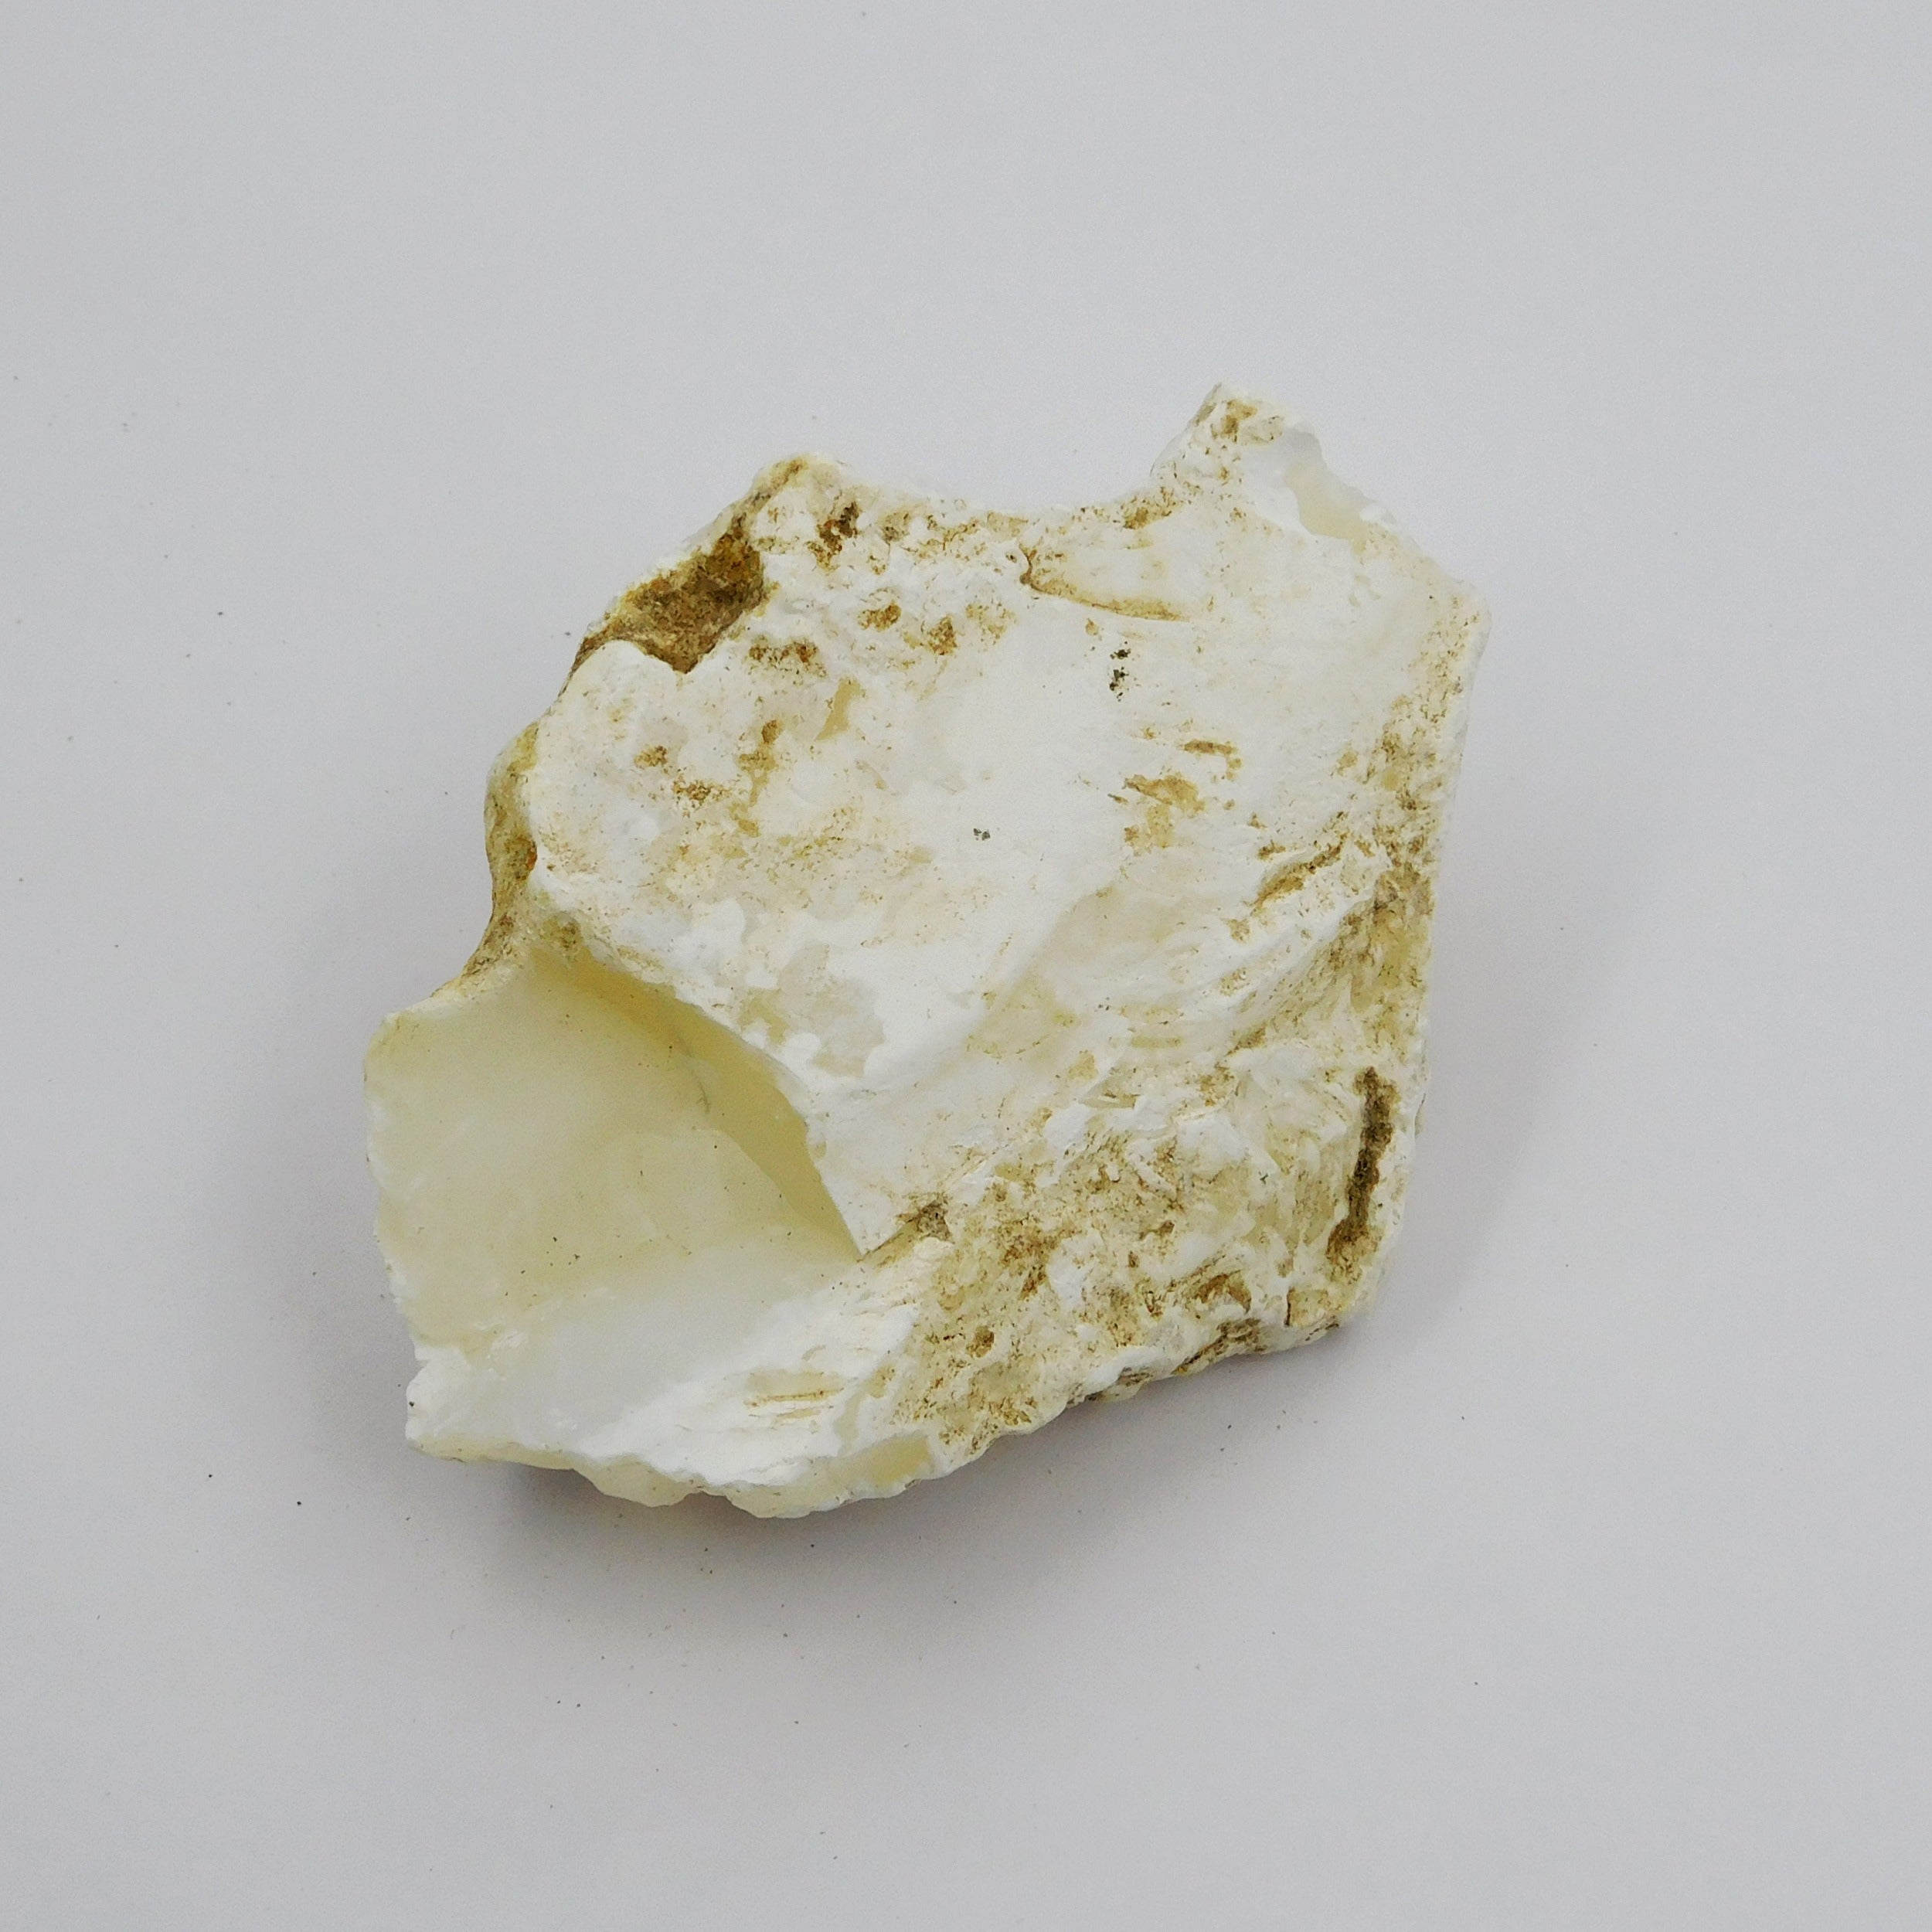 Certified 100% White Opal Uncut Raw 399.99 Carat White Natural Opal Rough Loose Gemstone - Opal Rough Excellent for Jewelry Making Stone Fast Shipping